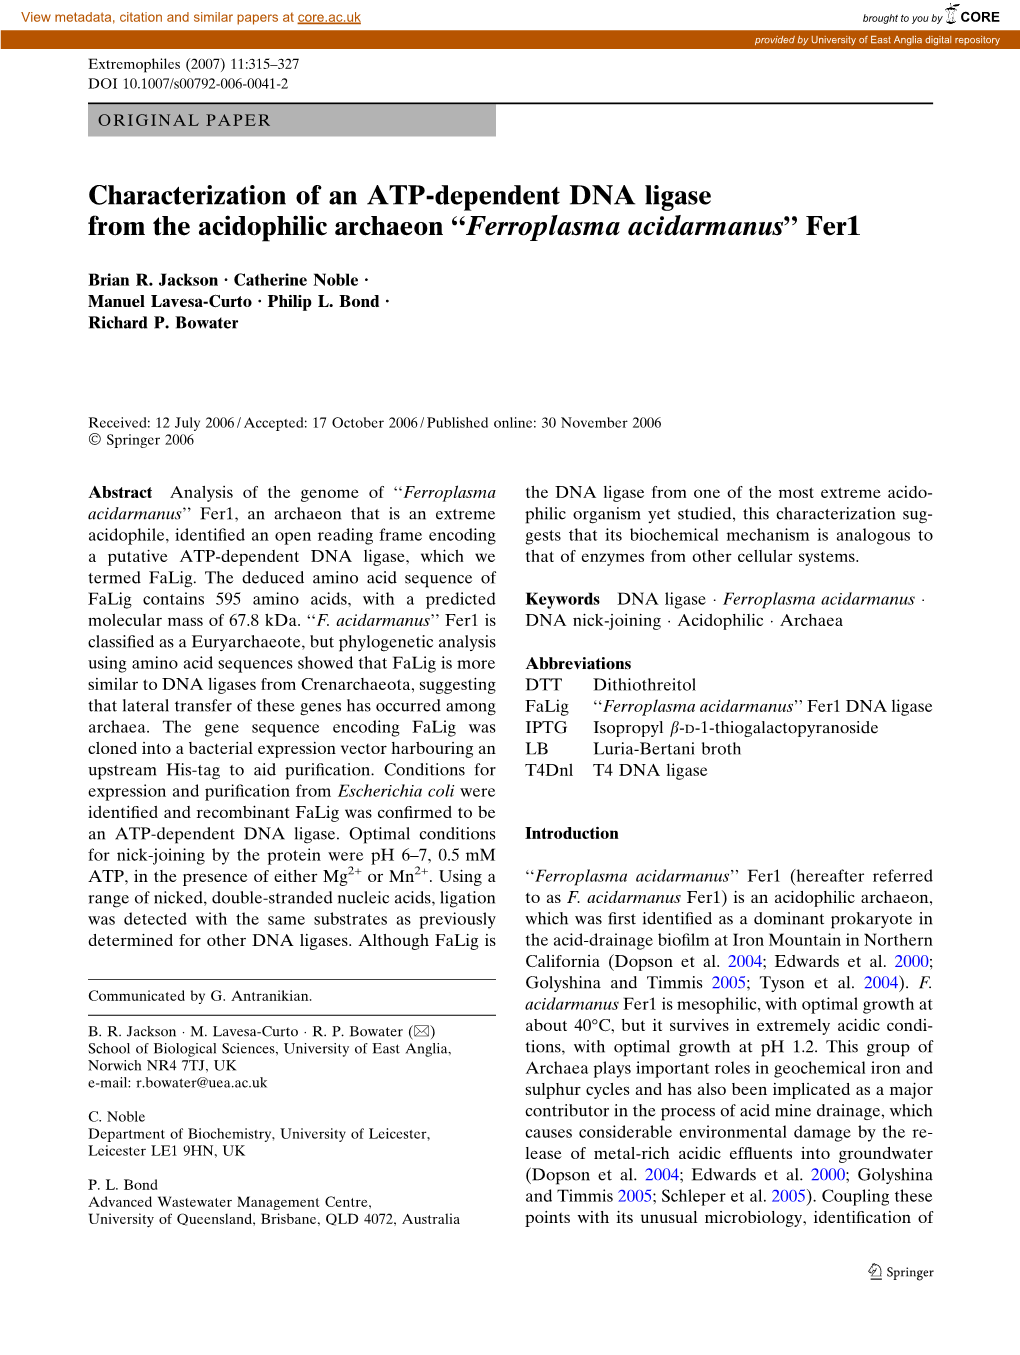 Characterization of an ATP-Dependent DNA Ligase from the Acidophilic Archaeon ‘‘Ferroplasma Acidarmanus’’ Fer1